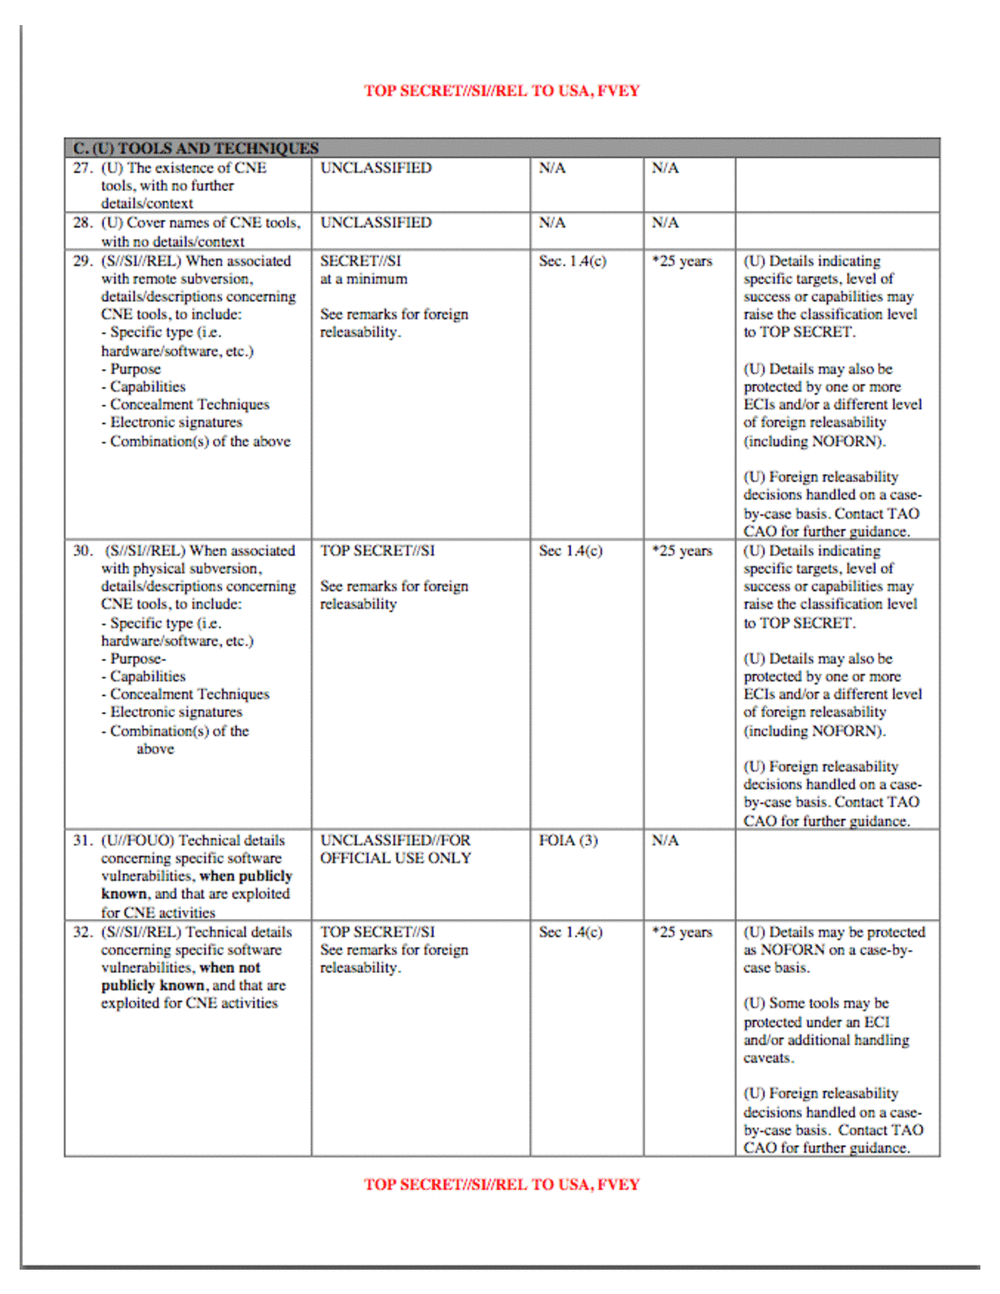 Page 5 from Computer Network Exploitation Classification Guide